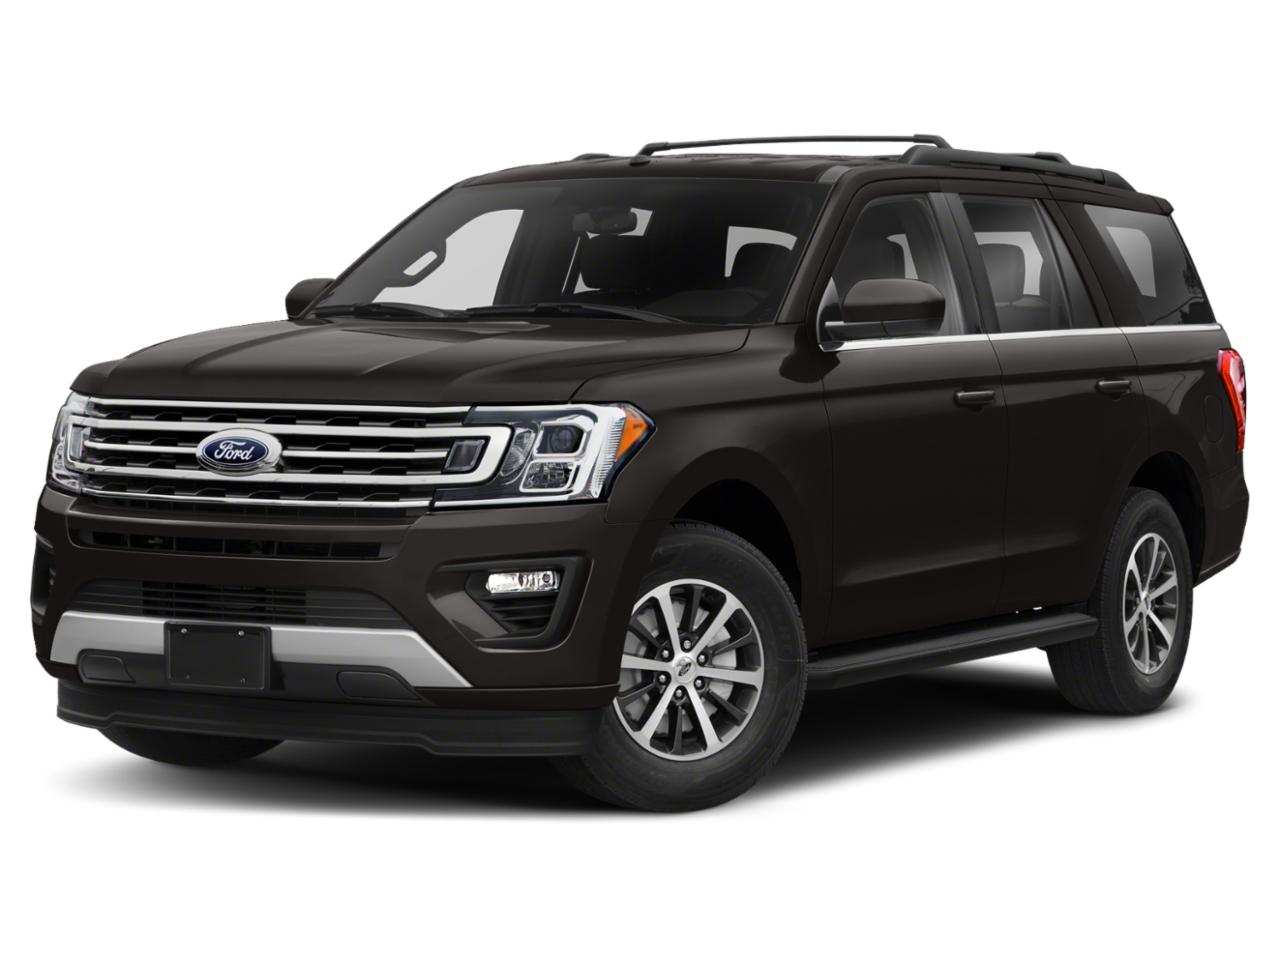 2018 Ford Expedition Vehicle Photo in BATON ROUGE, LA 70809-4546